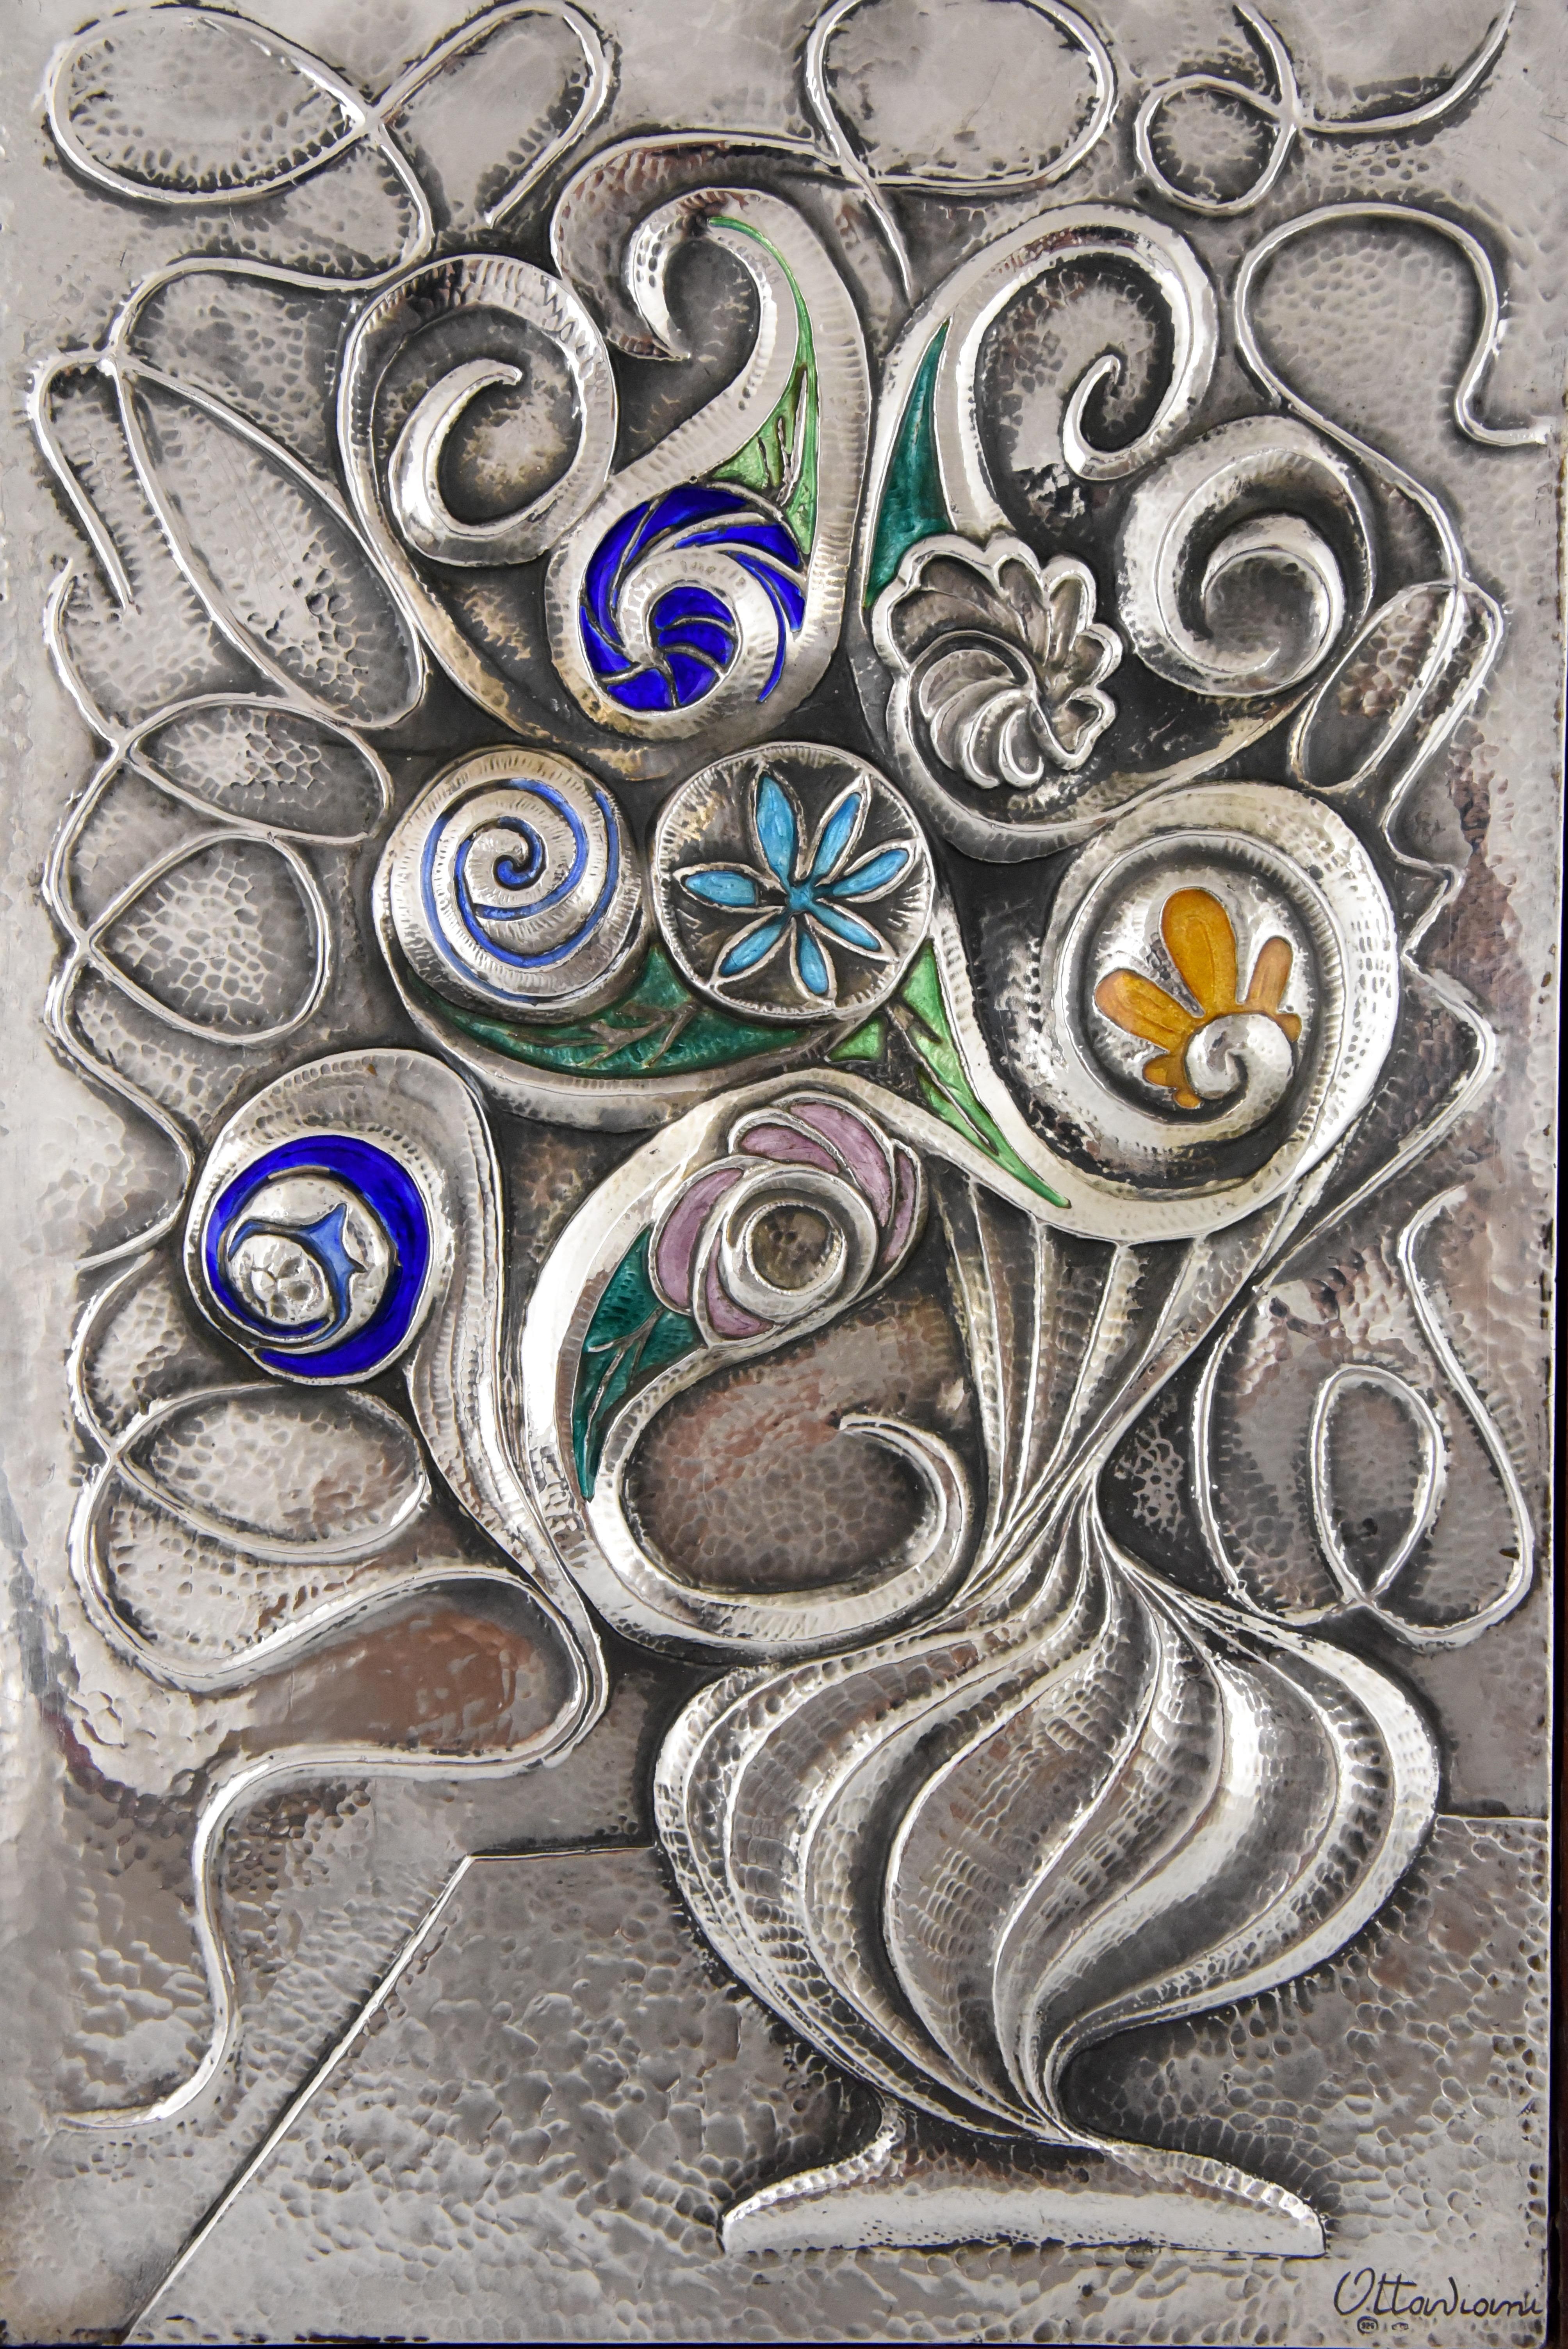 Fine Mid-Century Modern enamelled sterling silver wall decoration by the Italian artist Ottaviani picturing a flower vase in the original wooden frame, circa 1960. Signed and with hallmark.

Ottaviani (1945) is a jewelry and silver firm located in